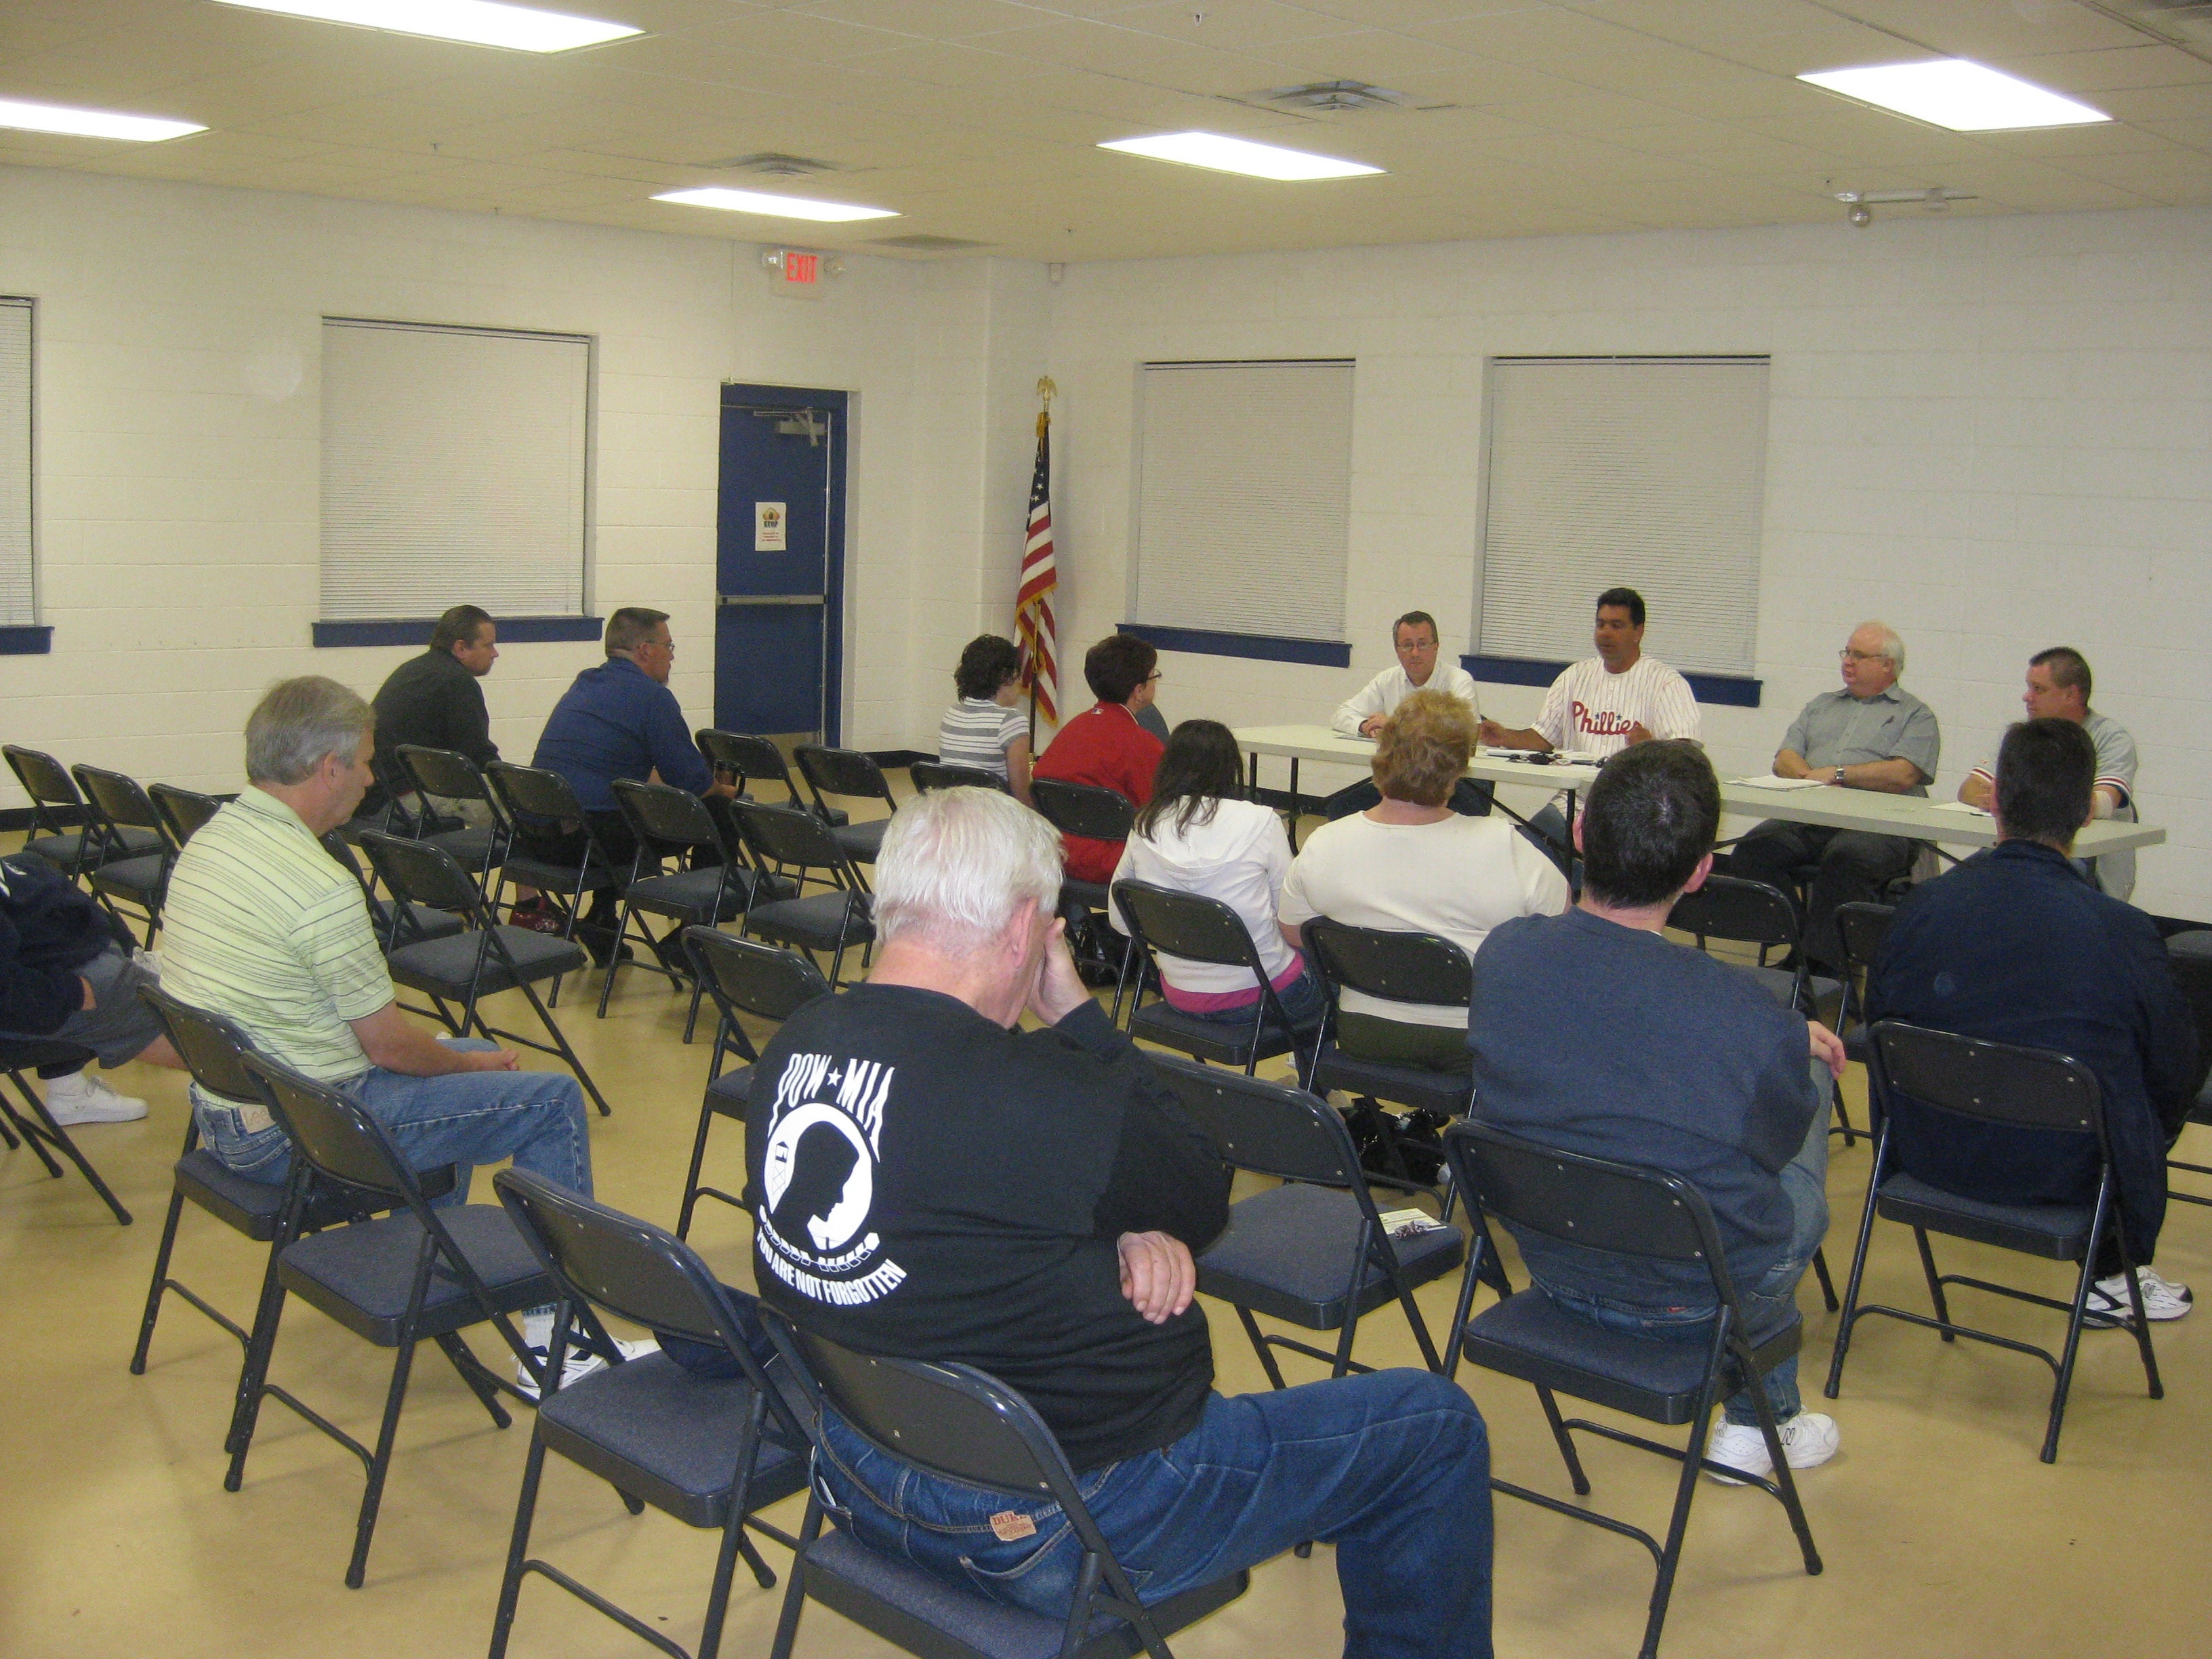 Pride for Mayfair and the Philles was in abundance at last night's Mayfair Town Watch meeting.